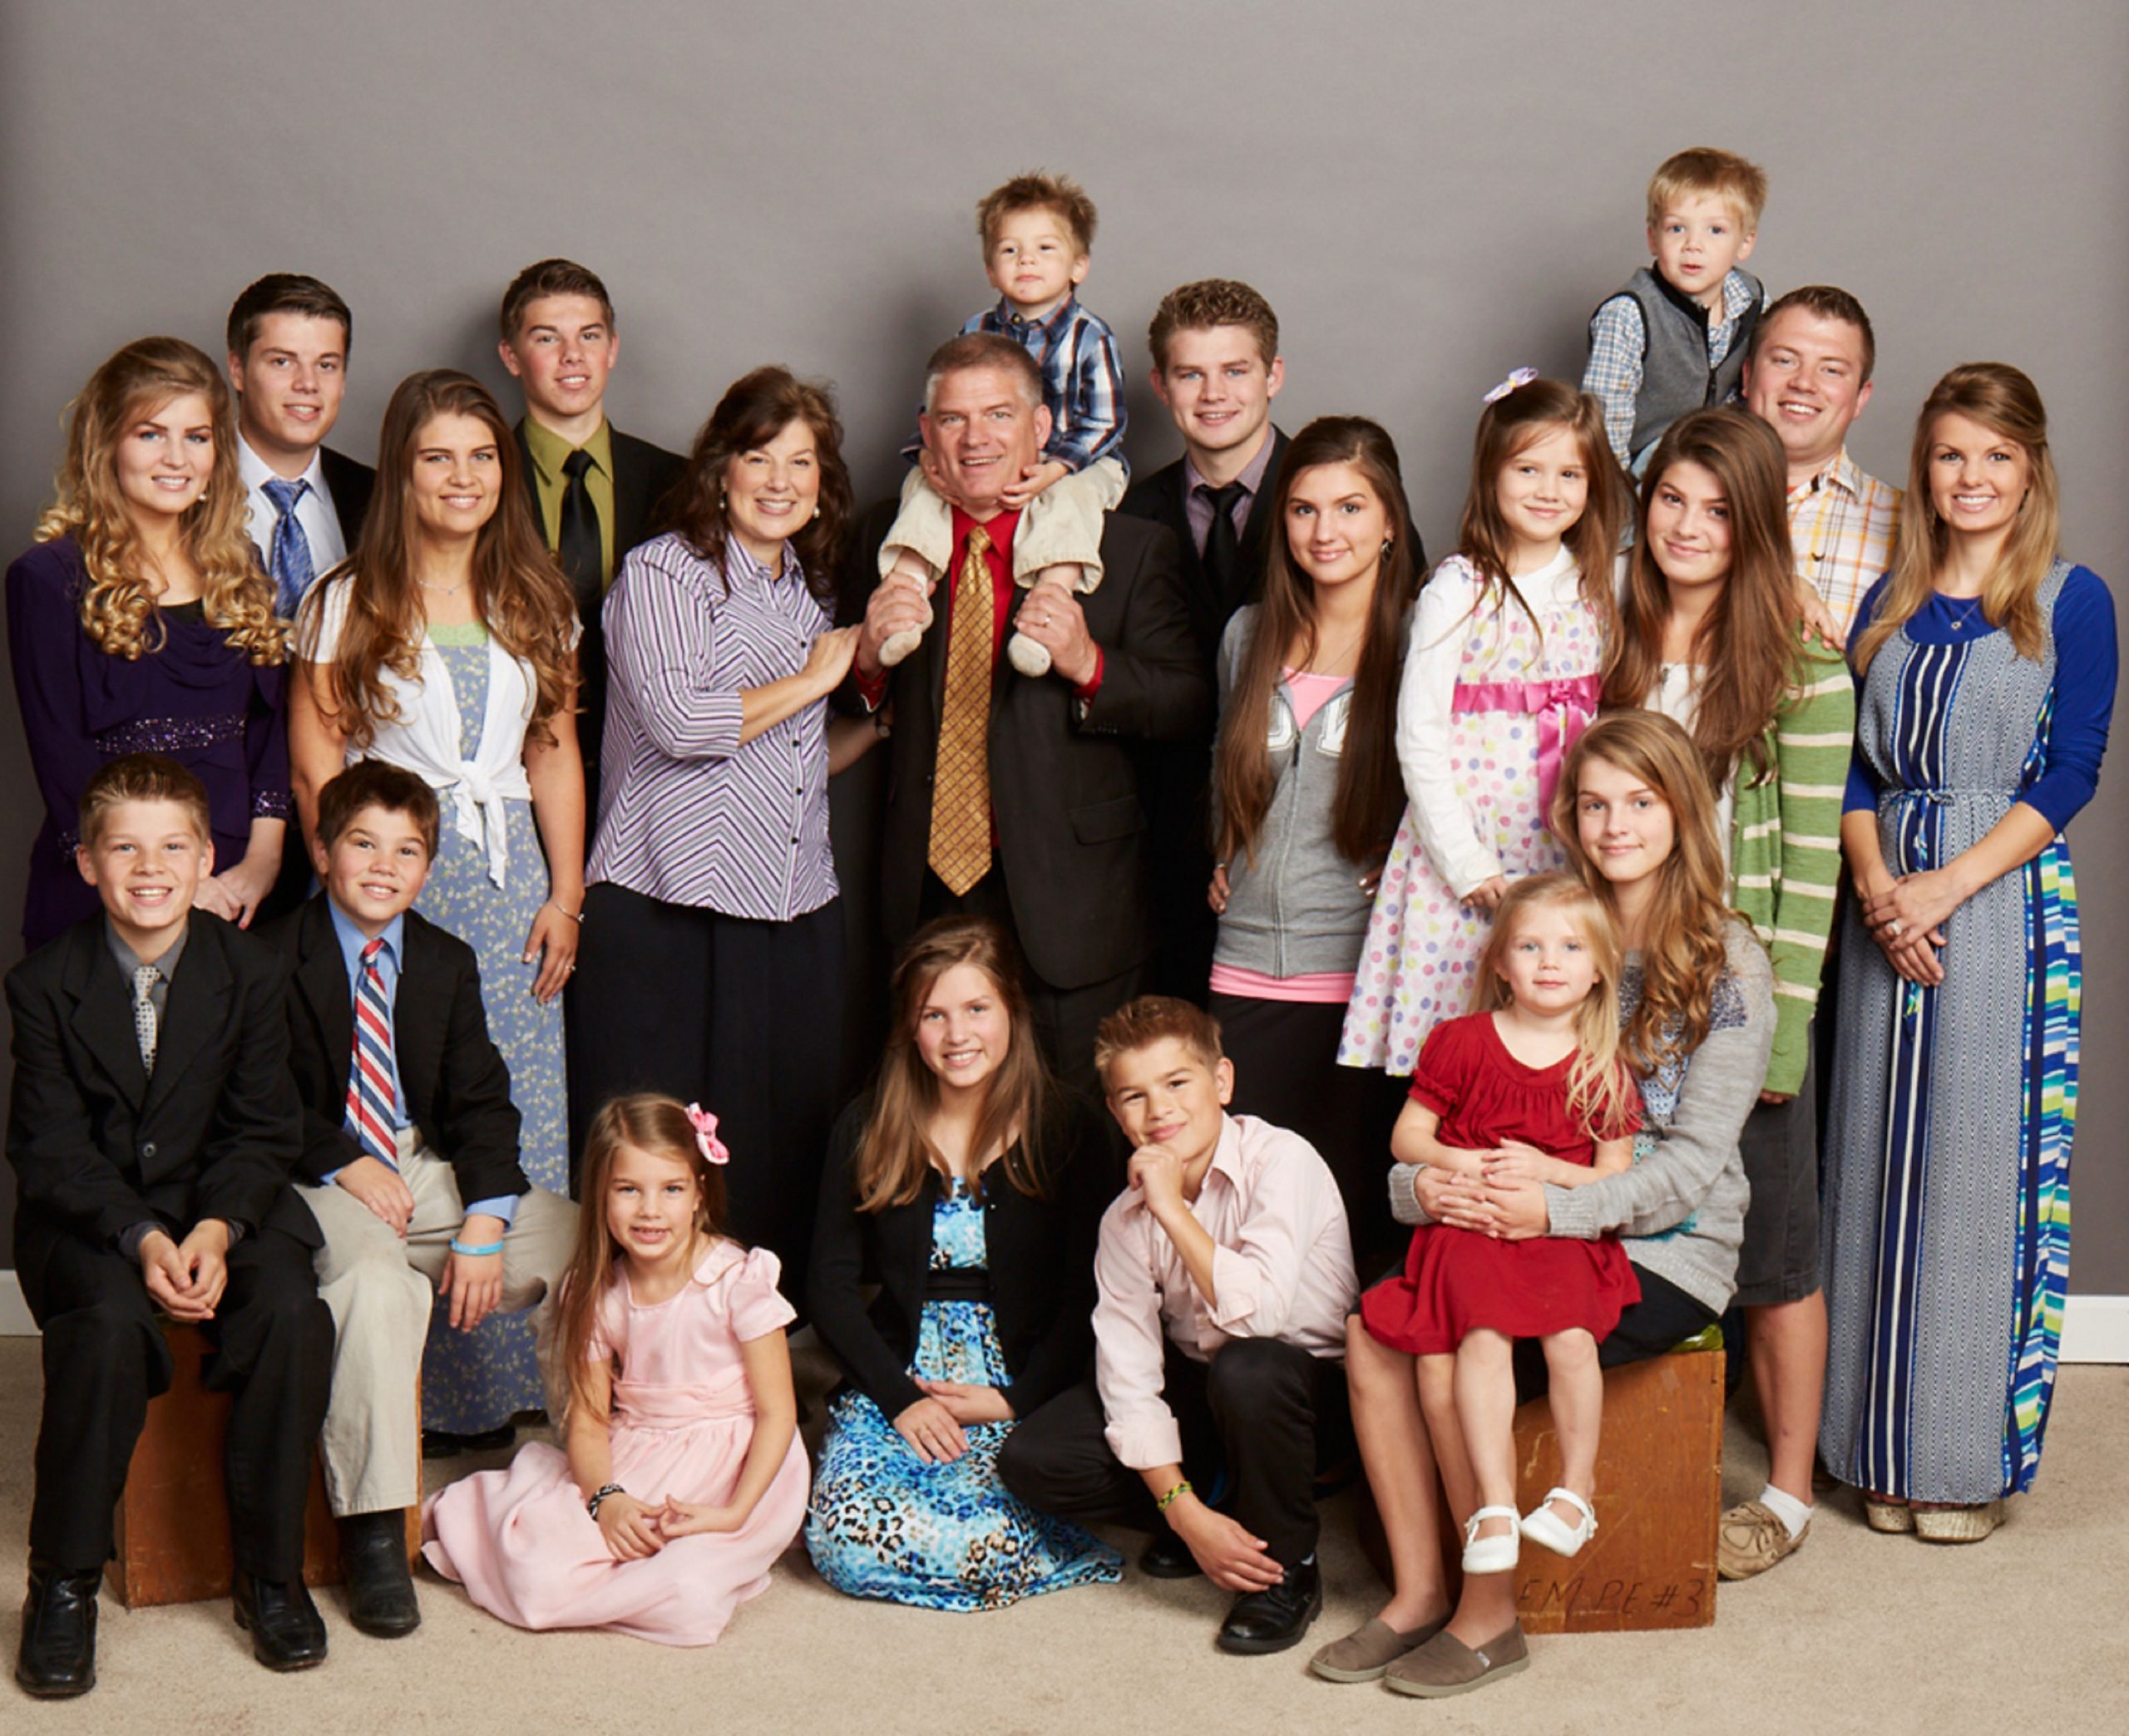 2014 group photo of the Bates family from Bringing Up Bates 